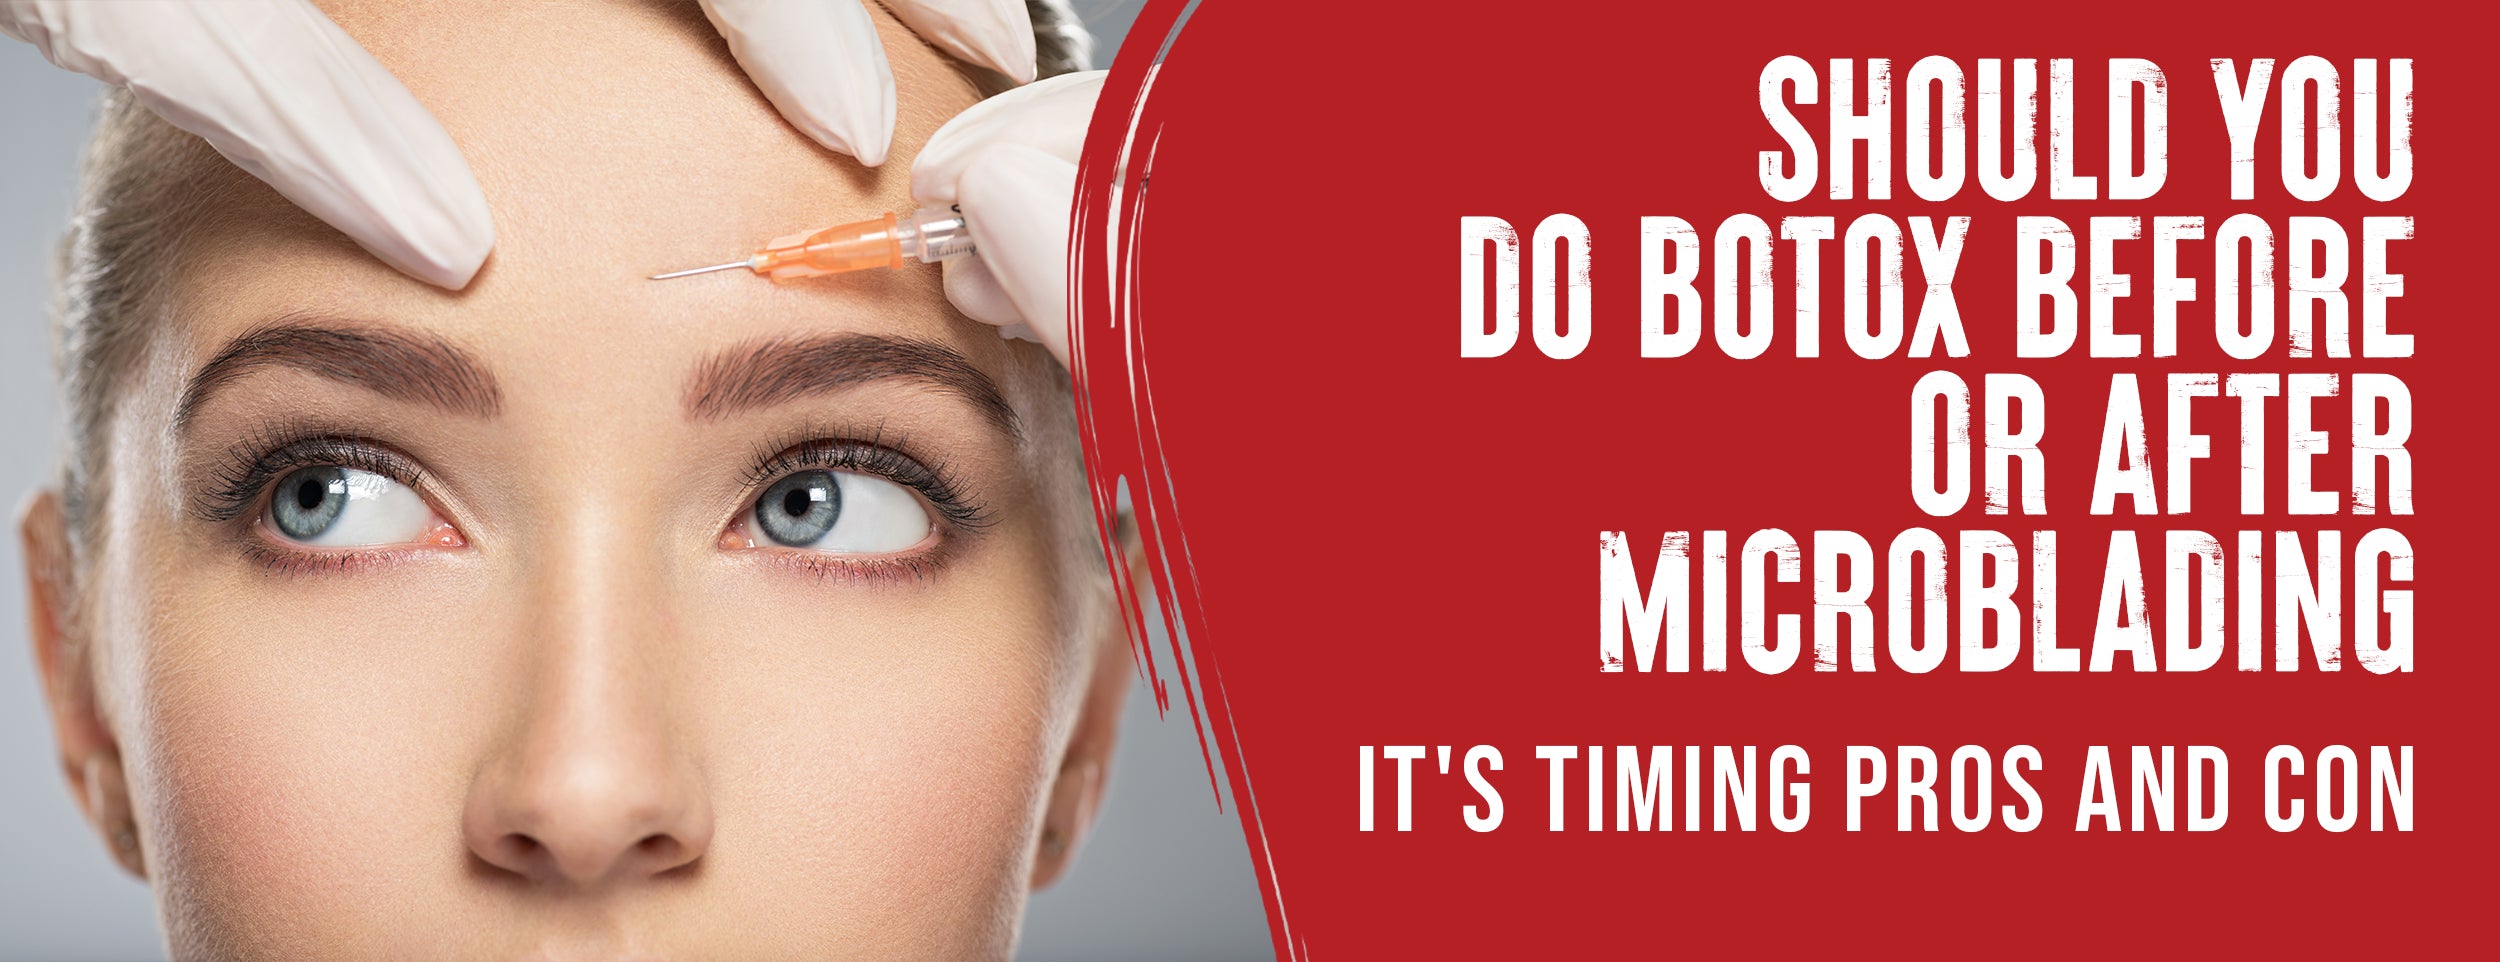  The right time to do Botox and microblading.